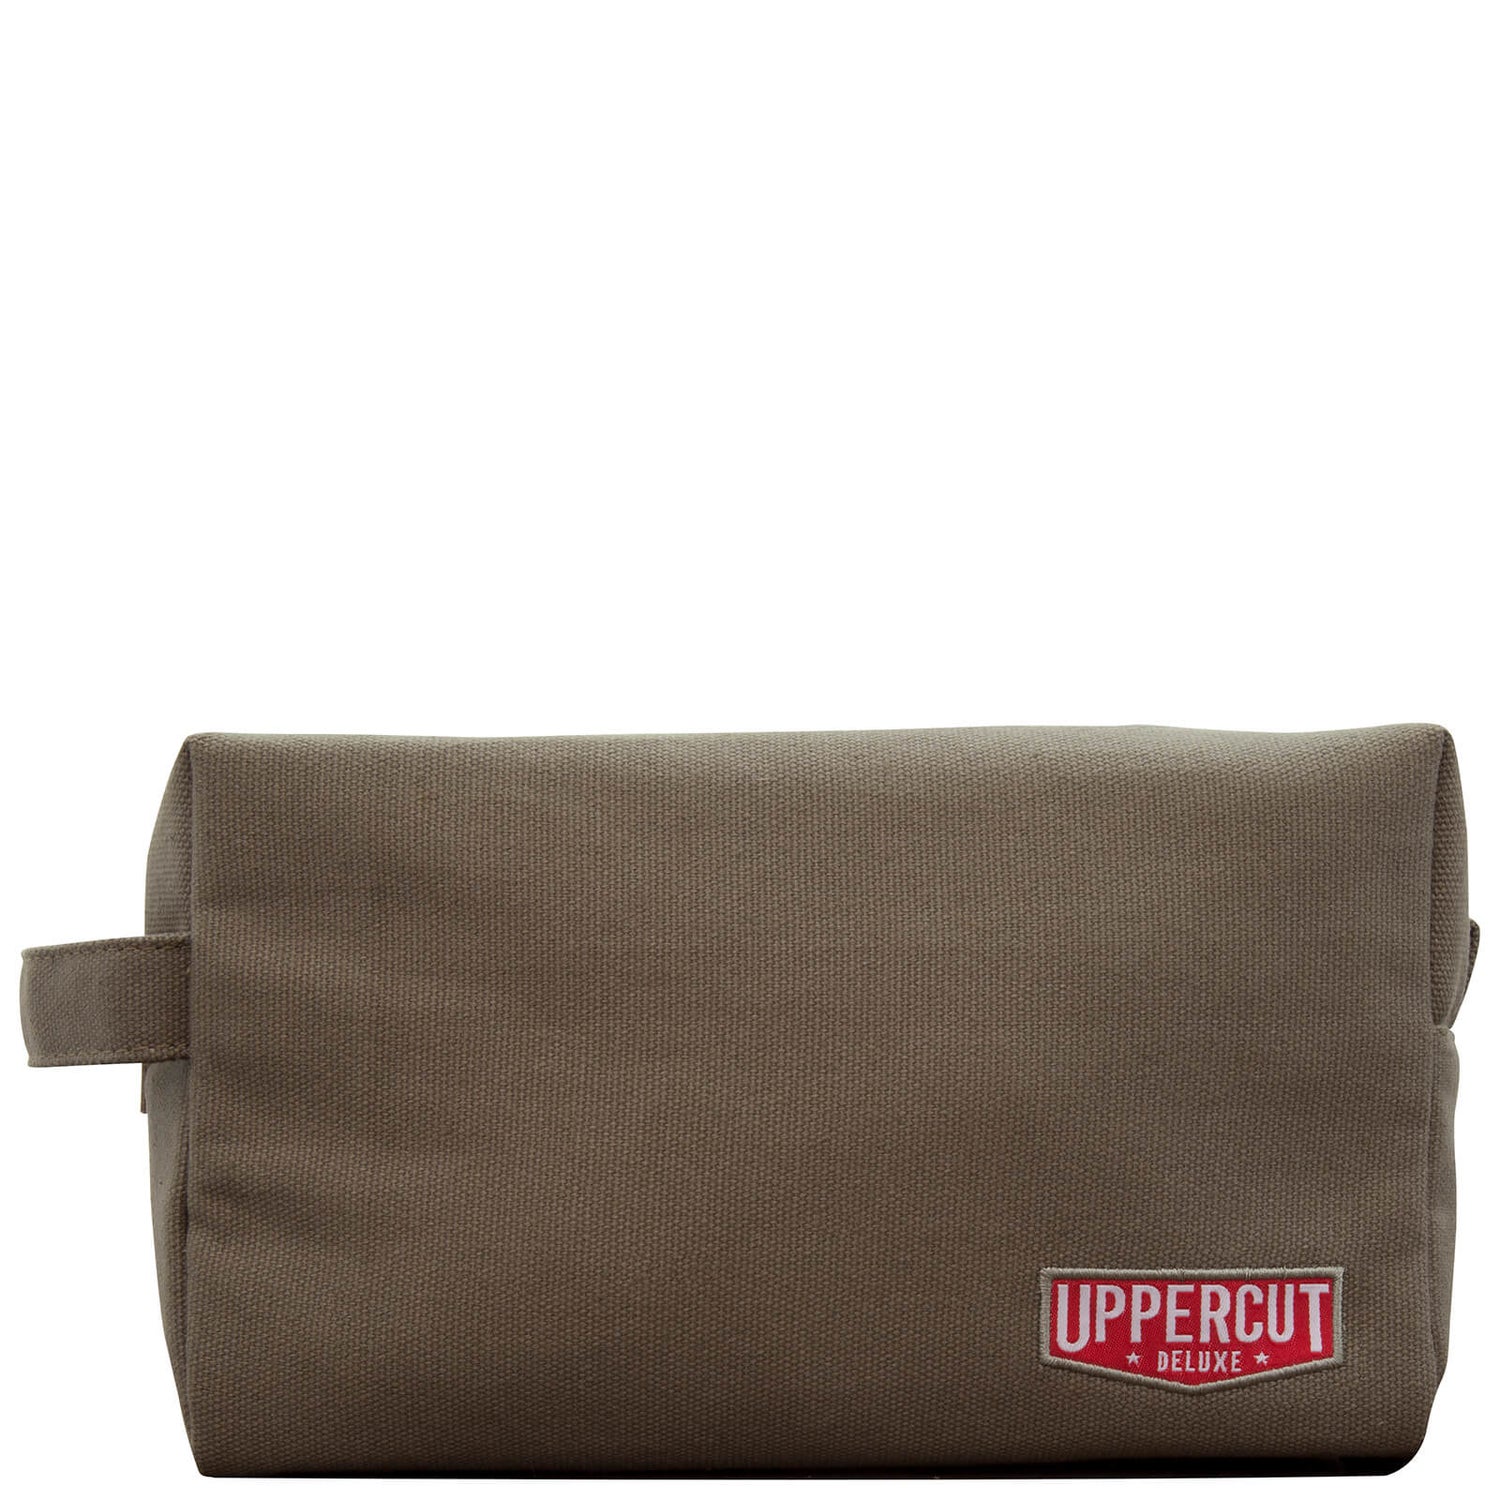 Uppercut Deluxe Wash Bag - Army Green